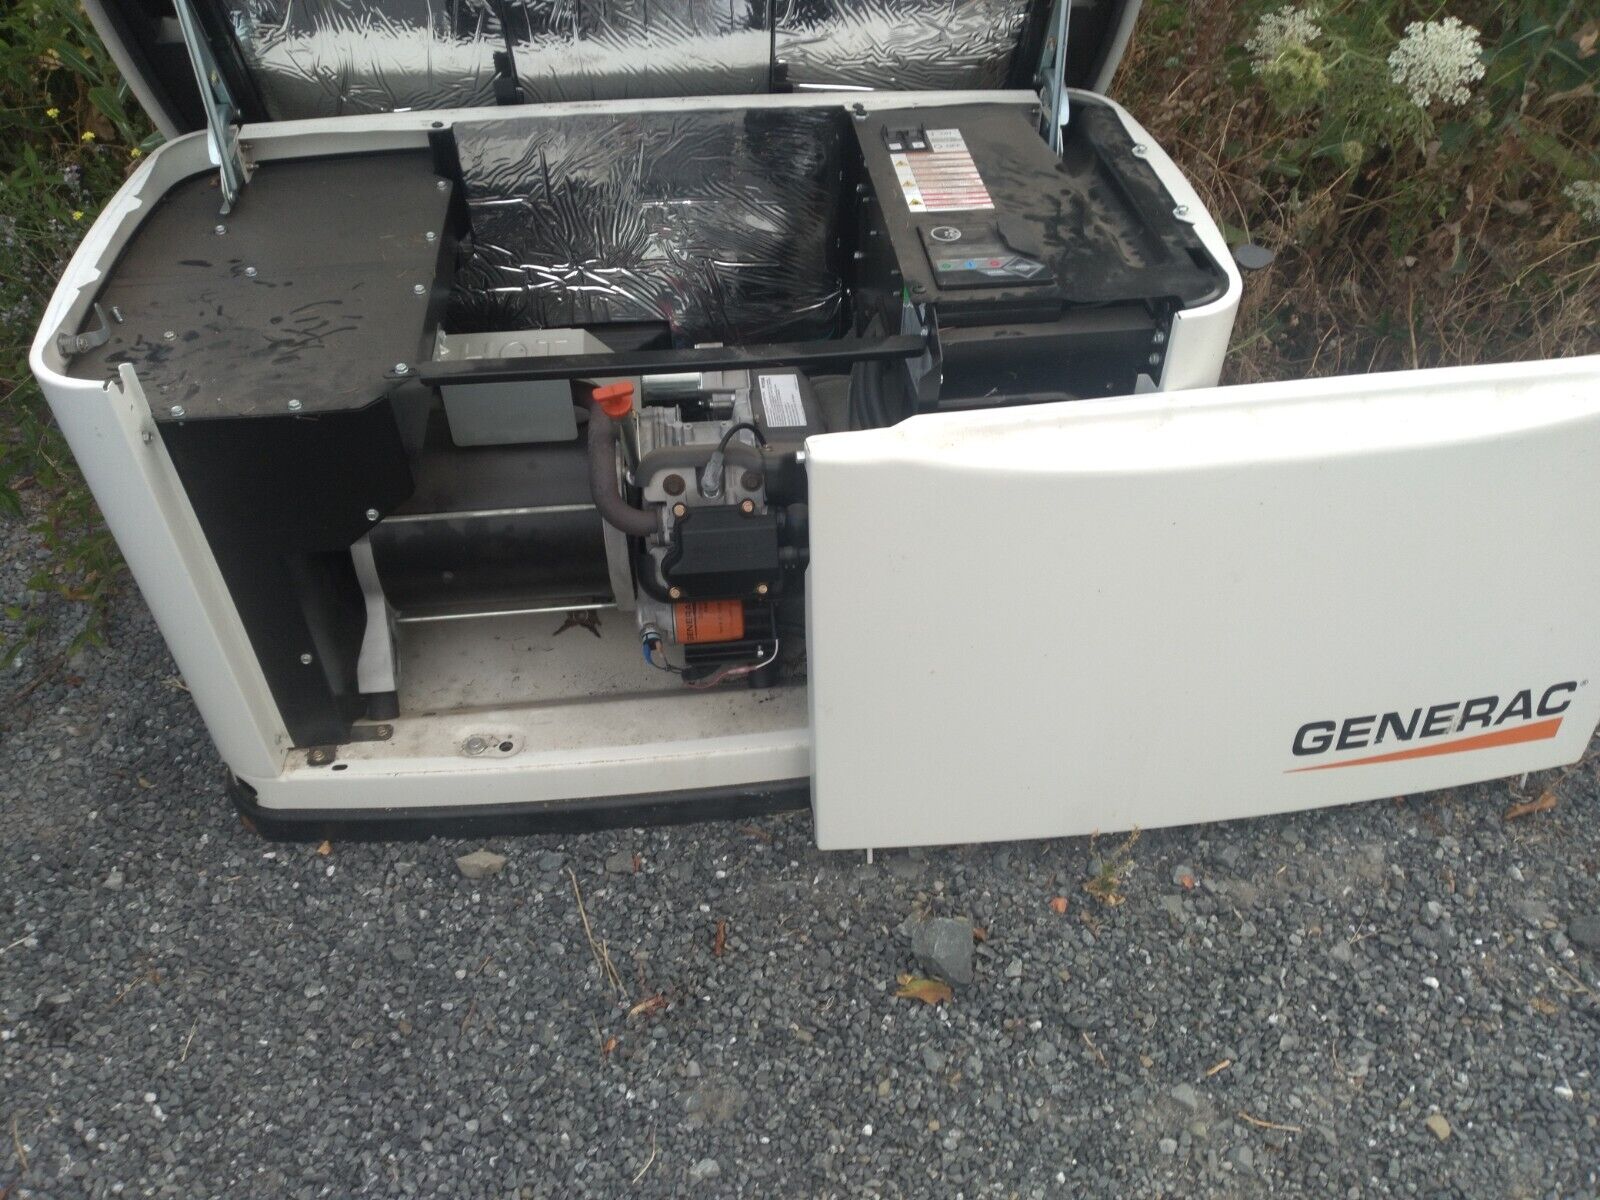 Generac generator 10kw standby unit 150hrs with new transfer switch